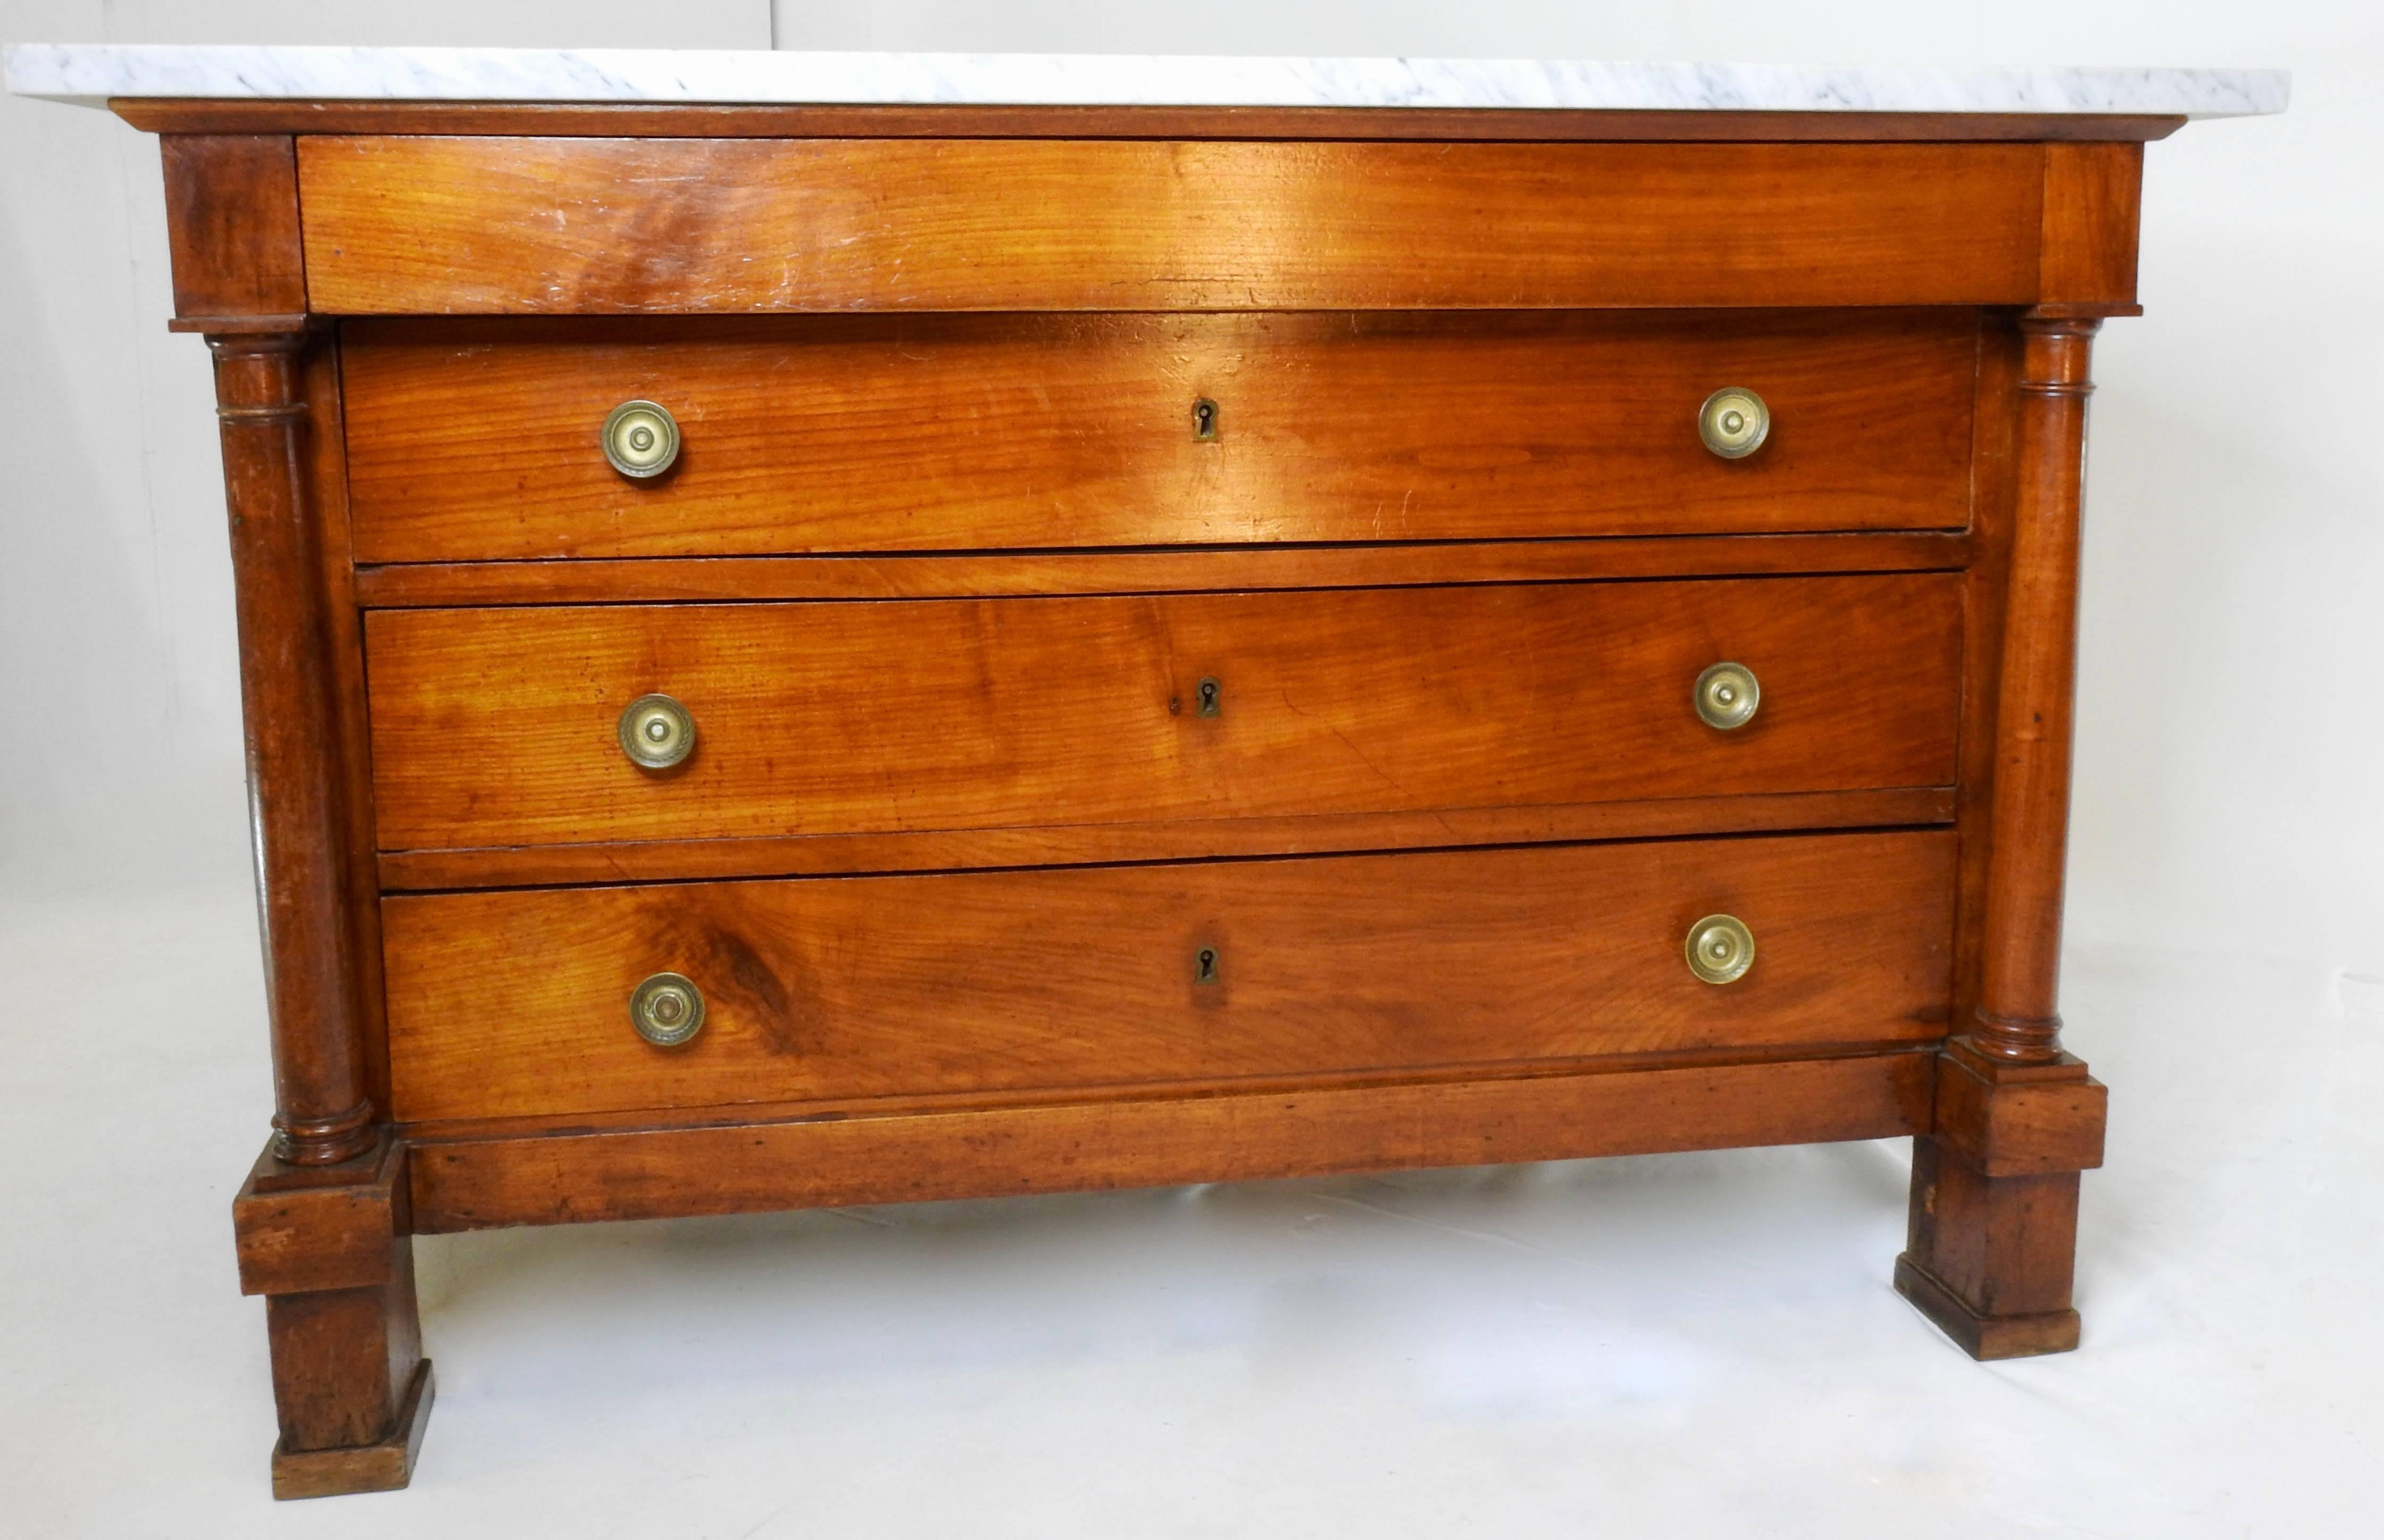 This is a fabulous cherry Louis Philippe marble-top commode with four drawers featuring bronze pulls. The marble top measures: 26.75